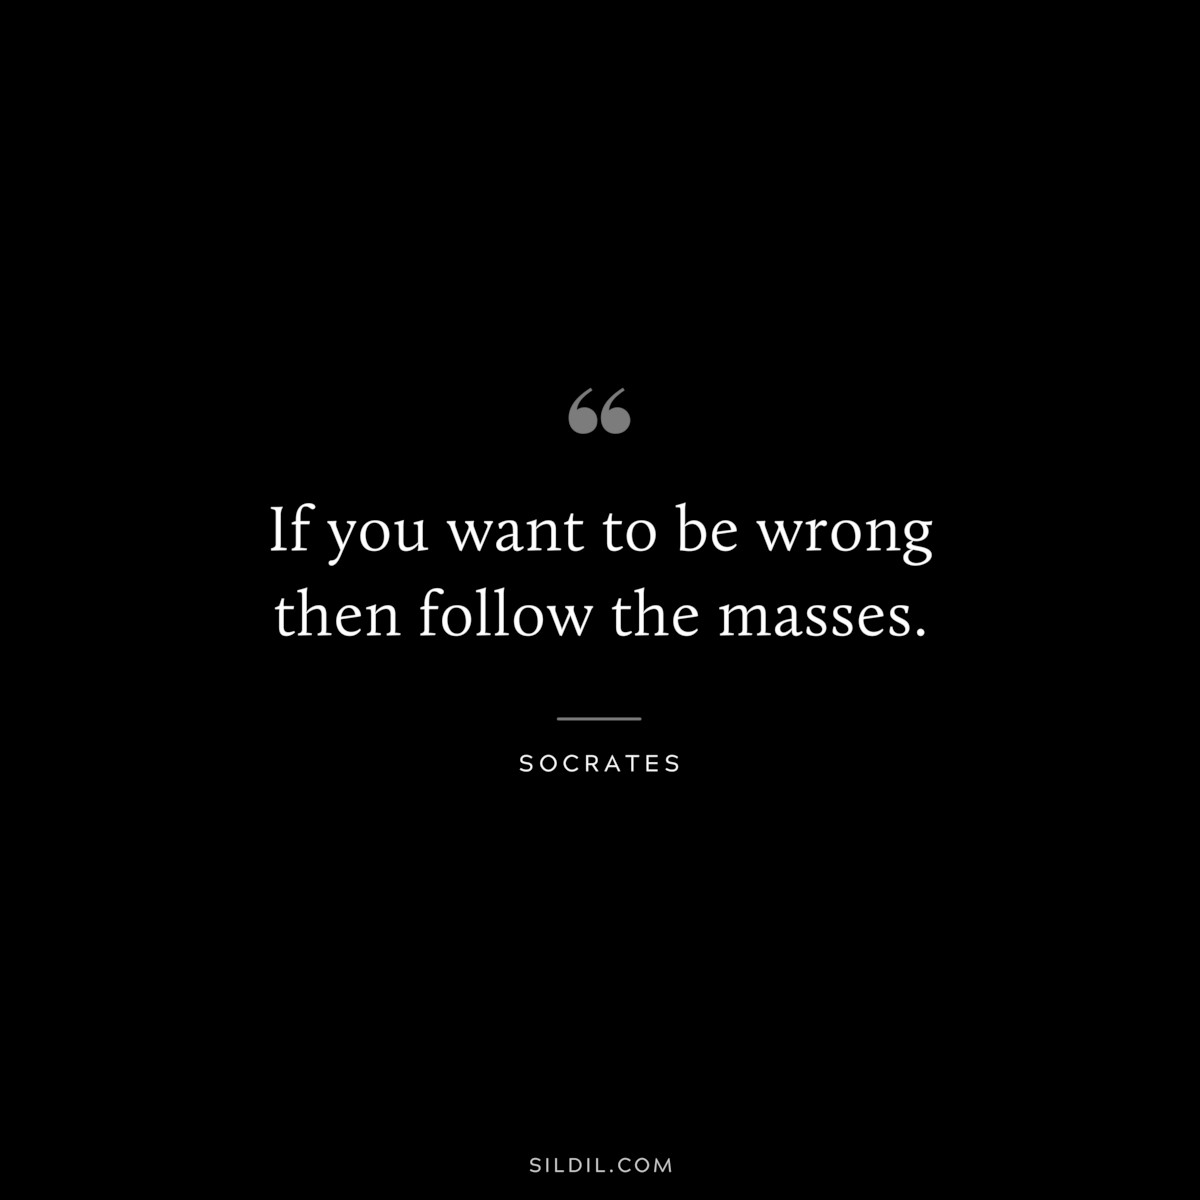 If you want to be wrong then follow the masses. ― Socrates